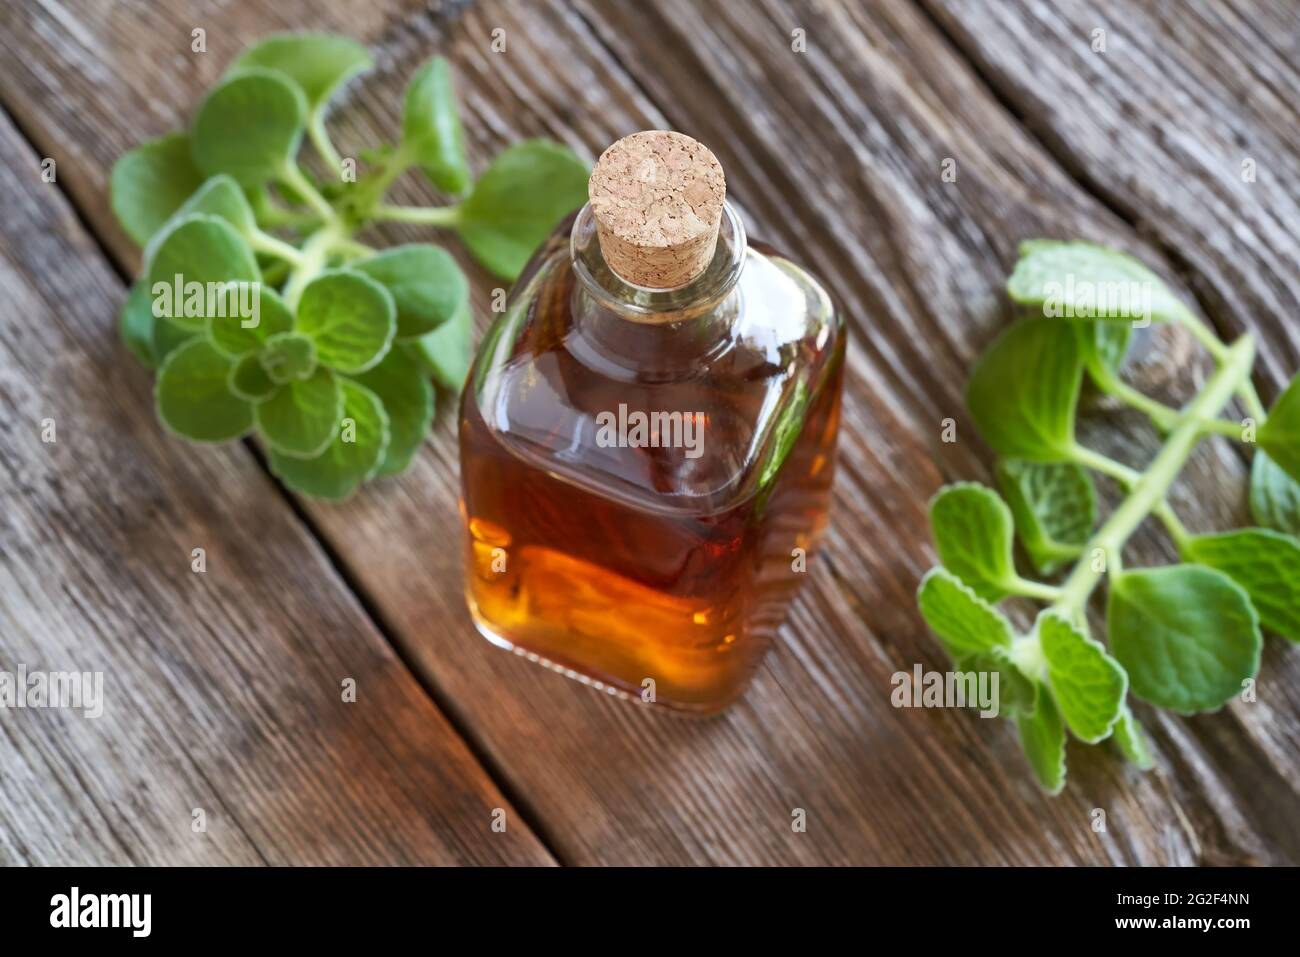 A bottle of silver spurflower tincture with fresh Plectranthus argentatus plant. Alternative or herbal medicine. Stock Photo